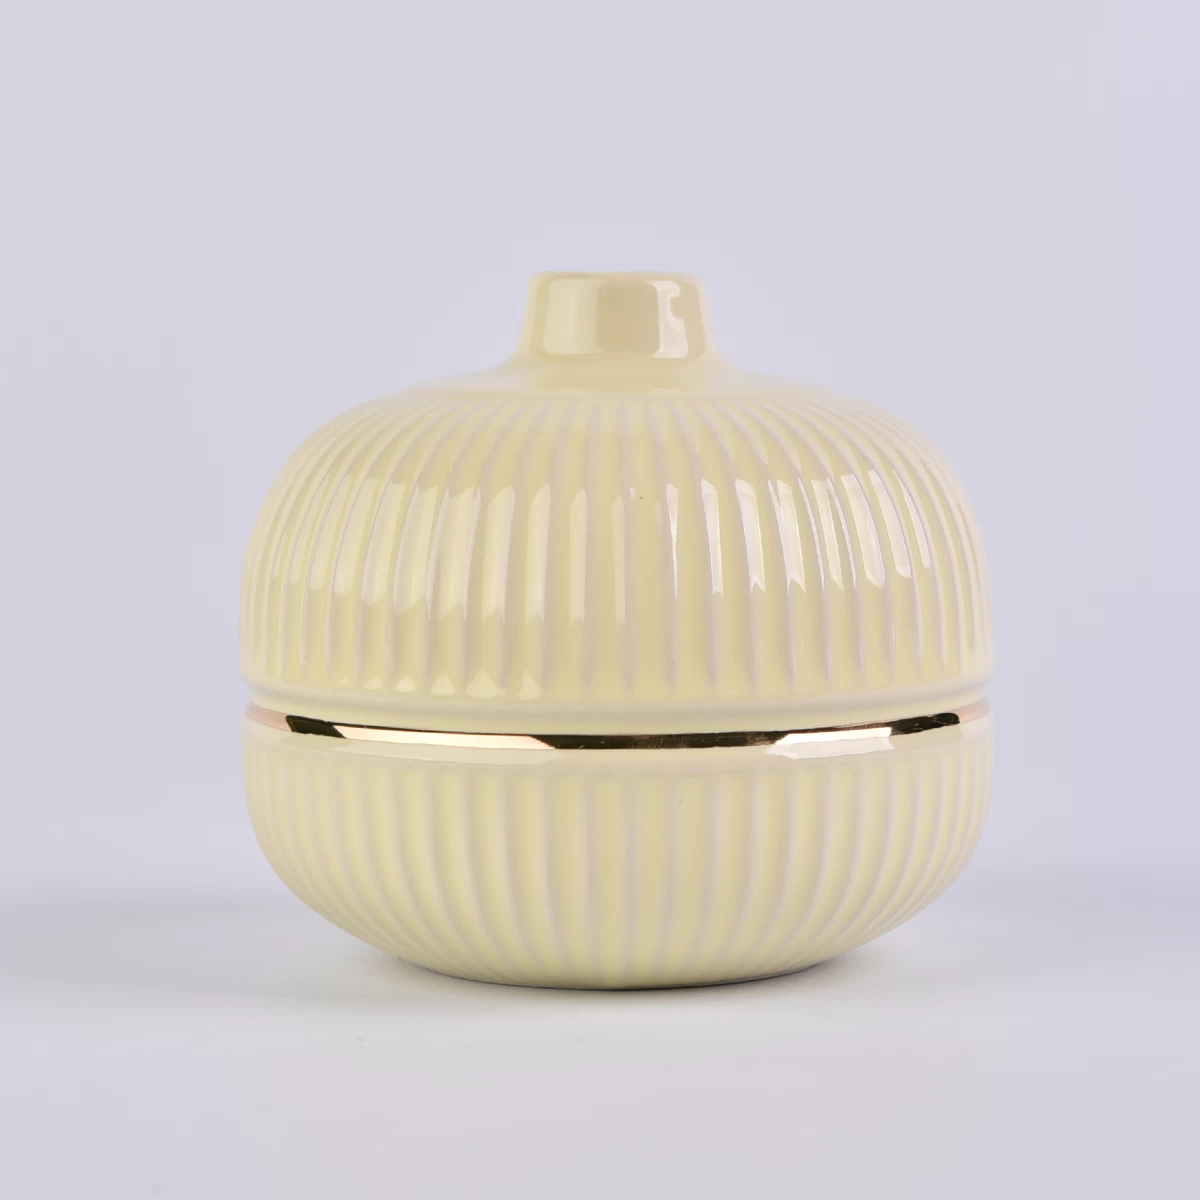 bright yellow ceramic bottle with gold ring, decorative ceramic diffuser bottles for home